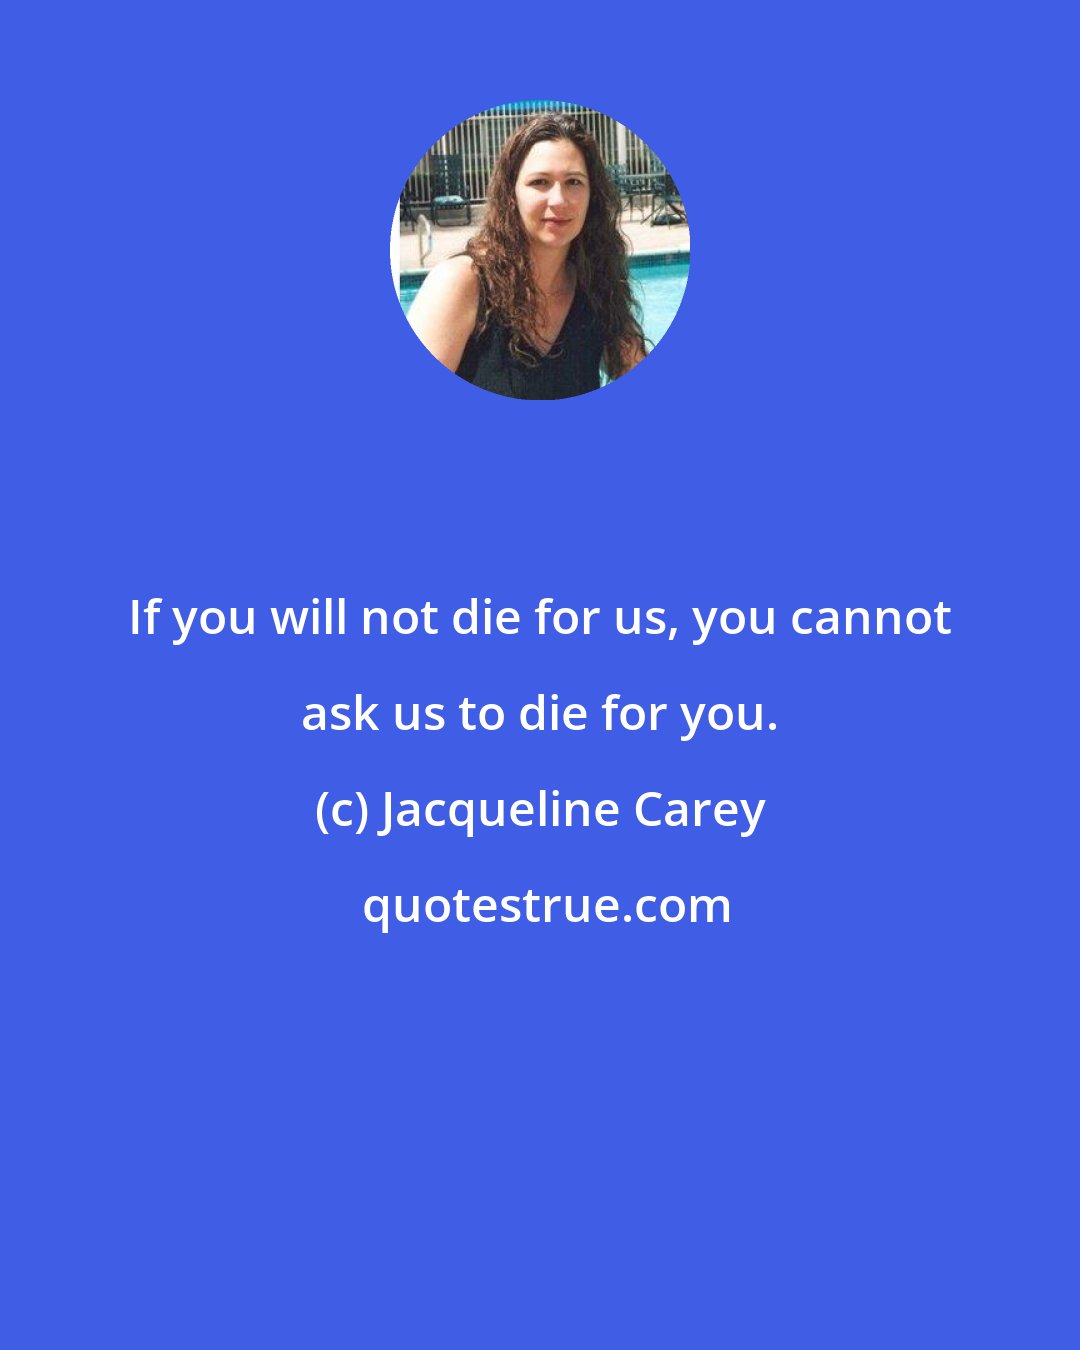 Jacqueline Carey: If you will not die for us, you cannot ask us to die for you.